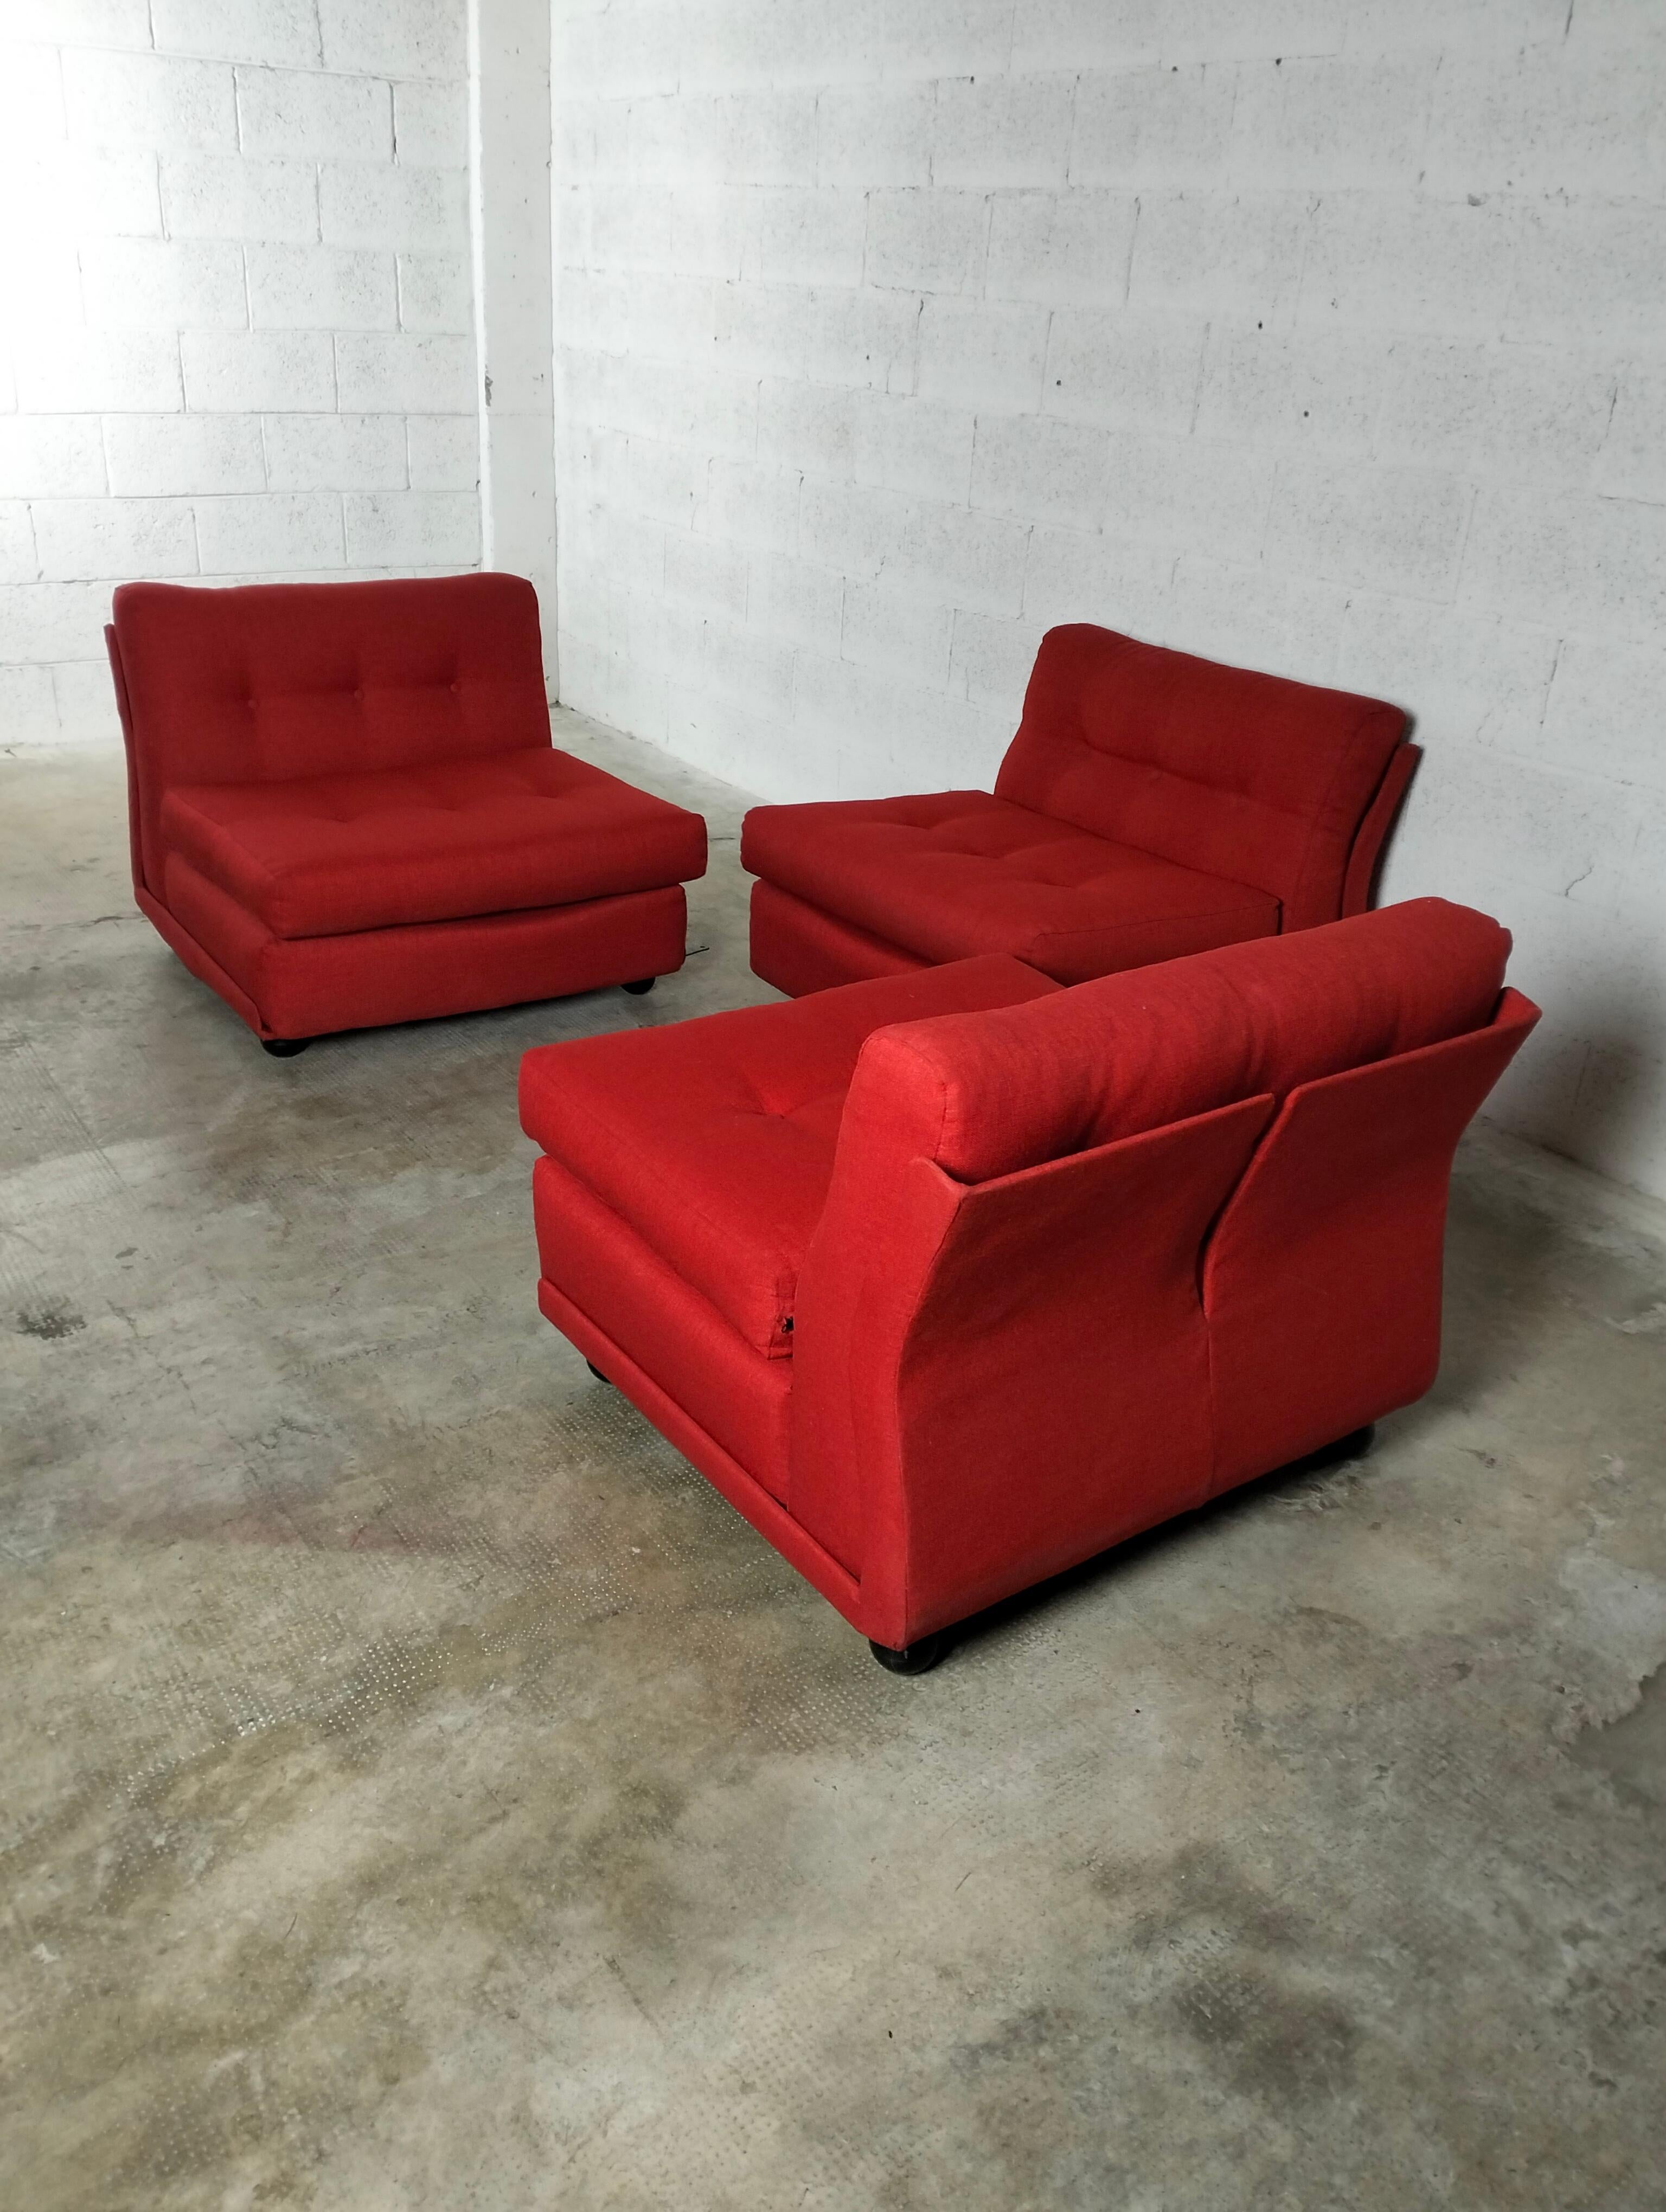 Italian Set of 3 Red Amanta Lounge Chairs/Sofa by Mario Bellini for C&B Italia, 1970s For Sale